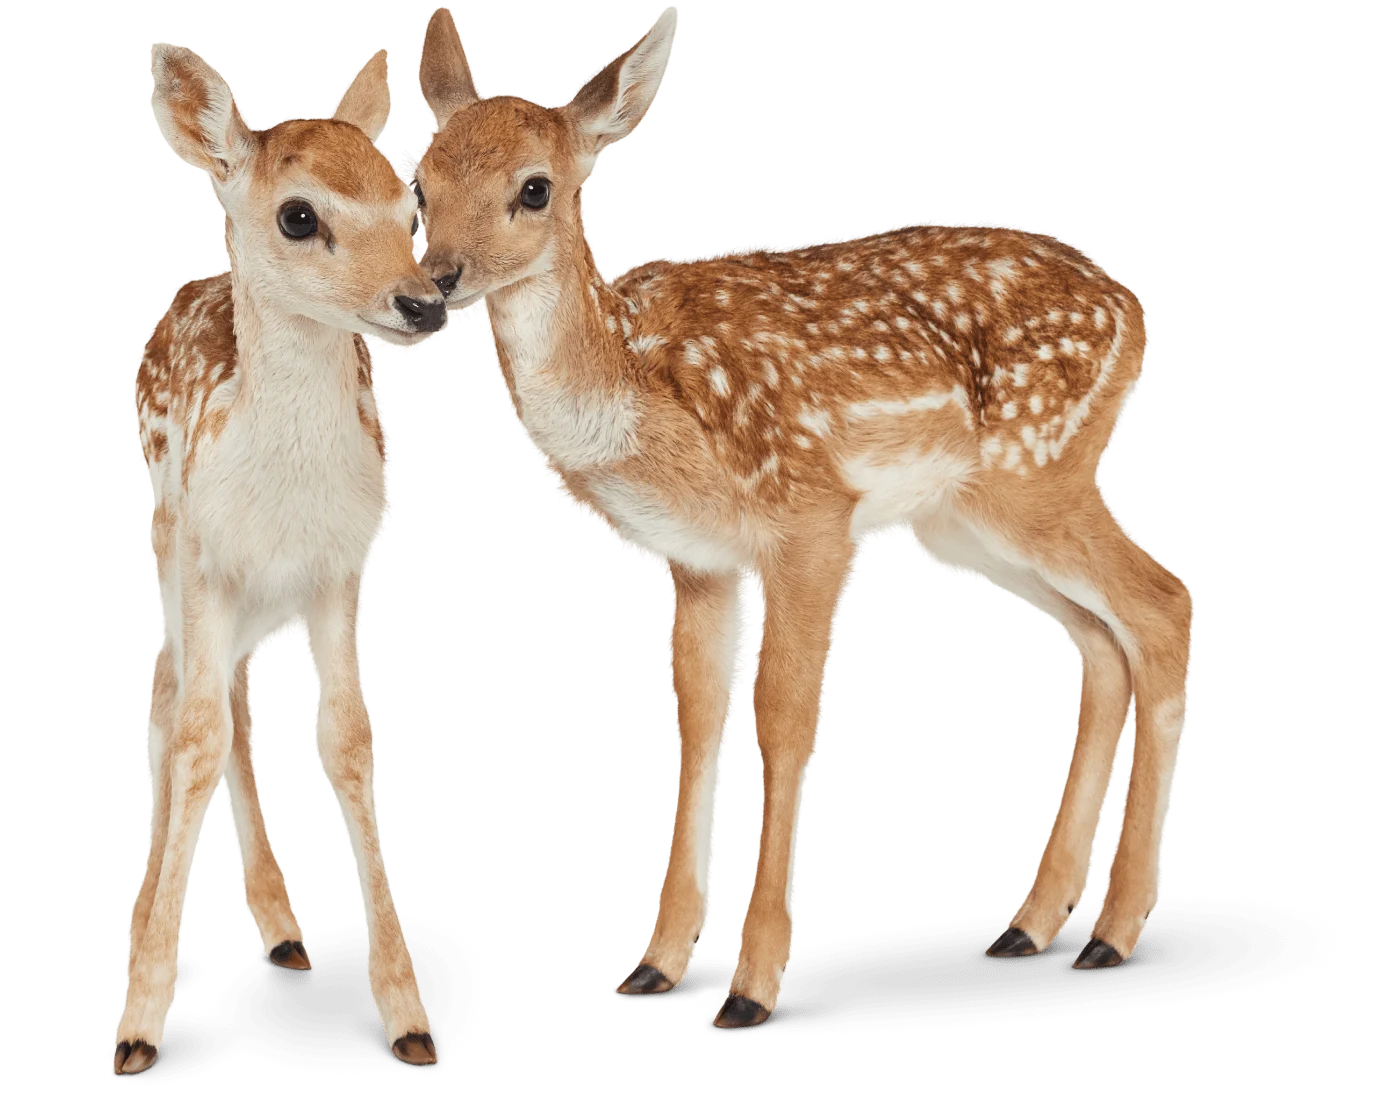 Two fawns standing together and touching noses.